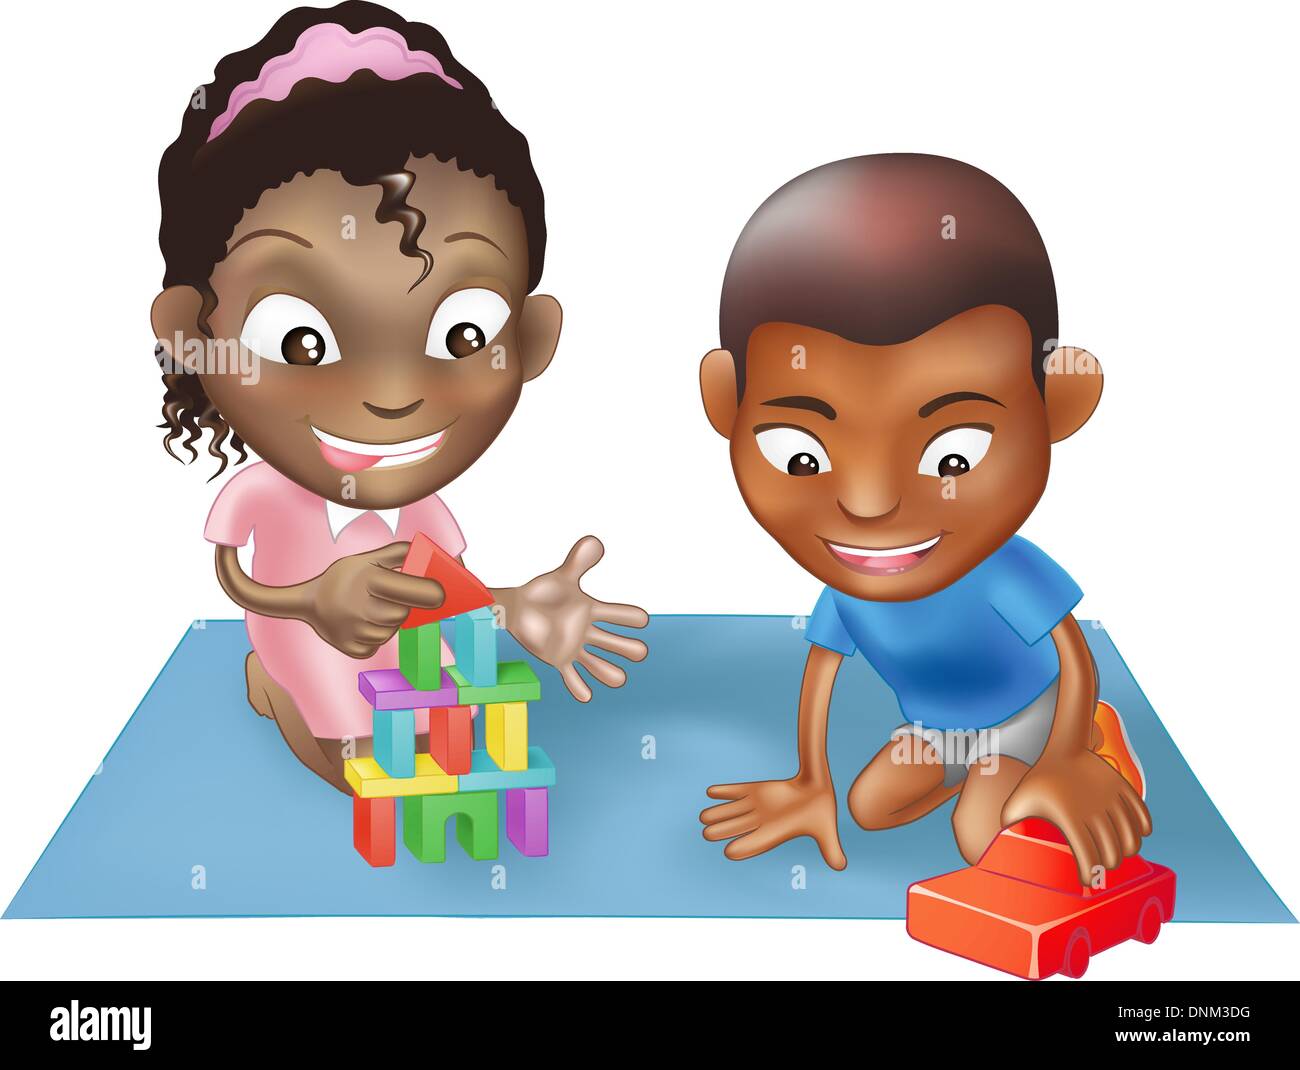 An illustration of two black ethnic chidlren playing with toys on a play mat Stock Vector